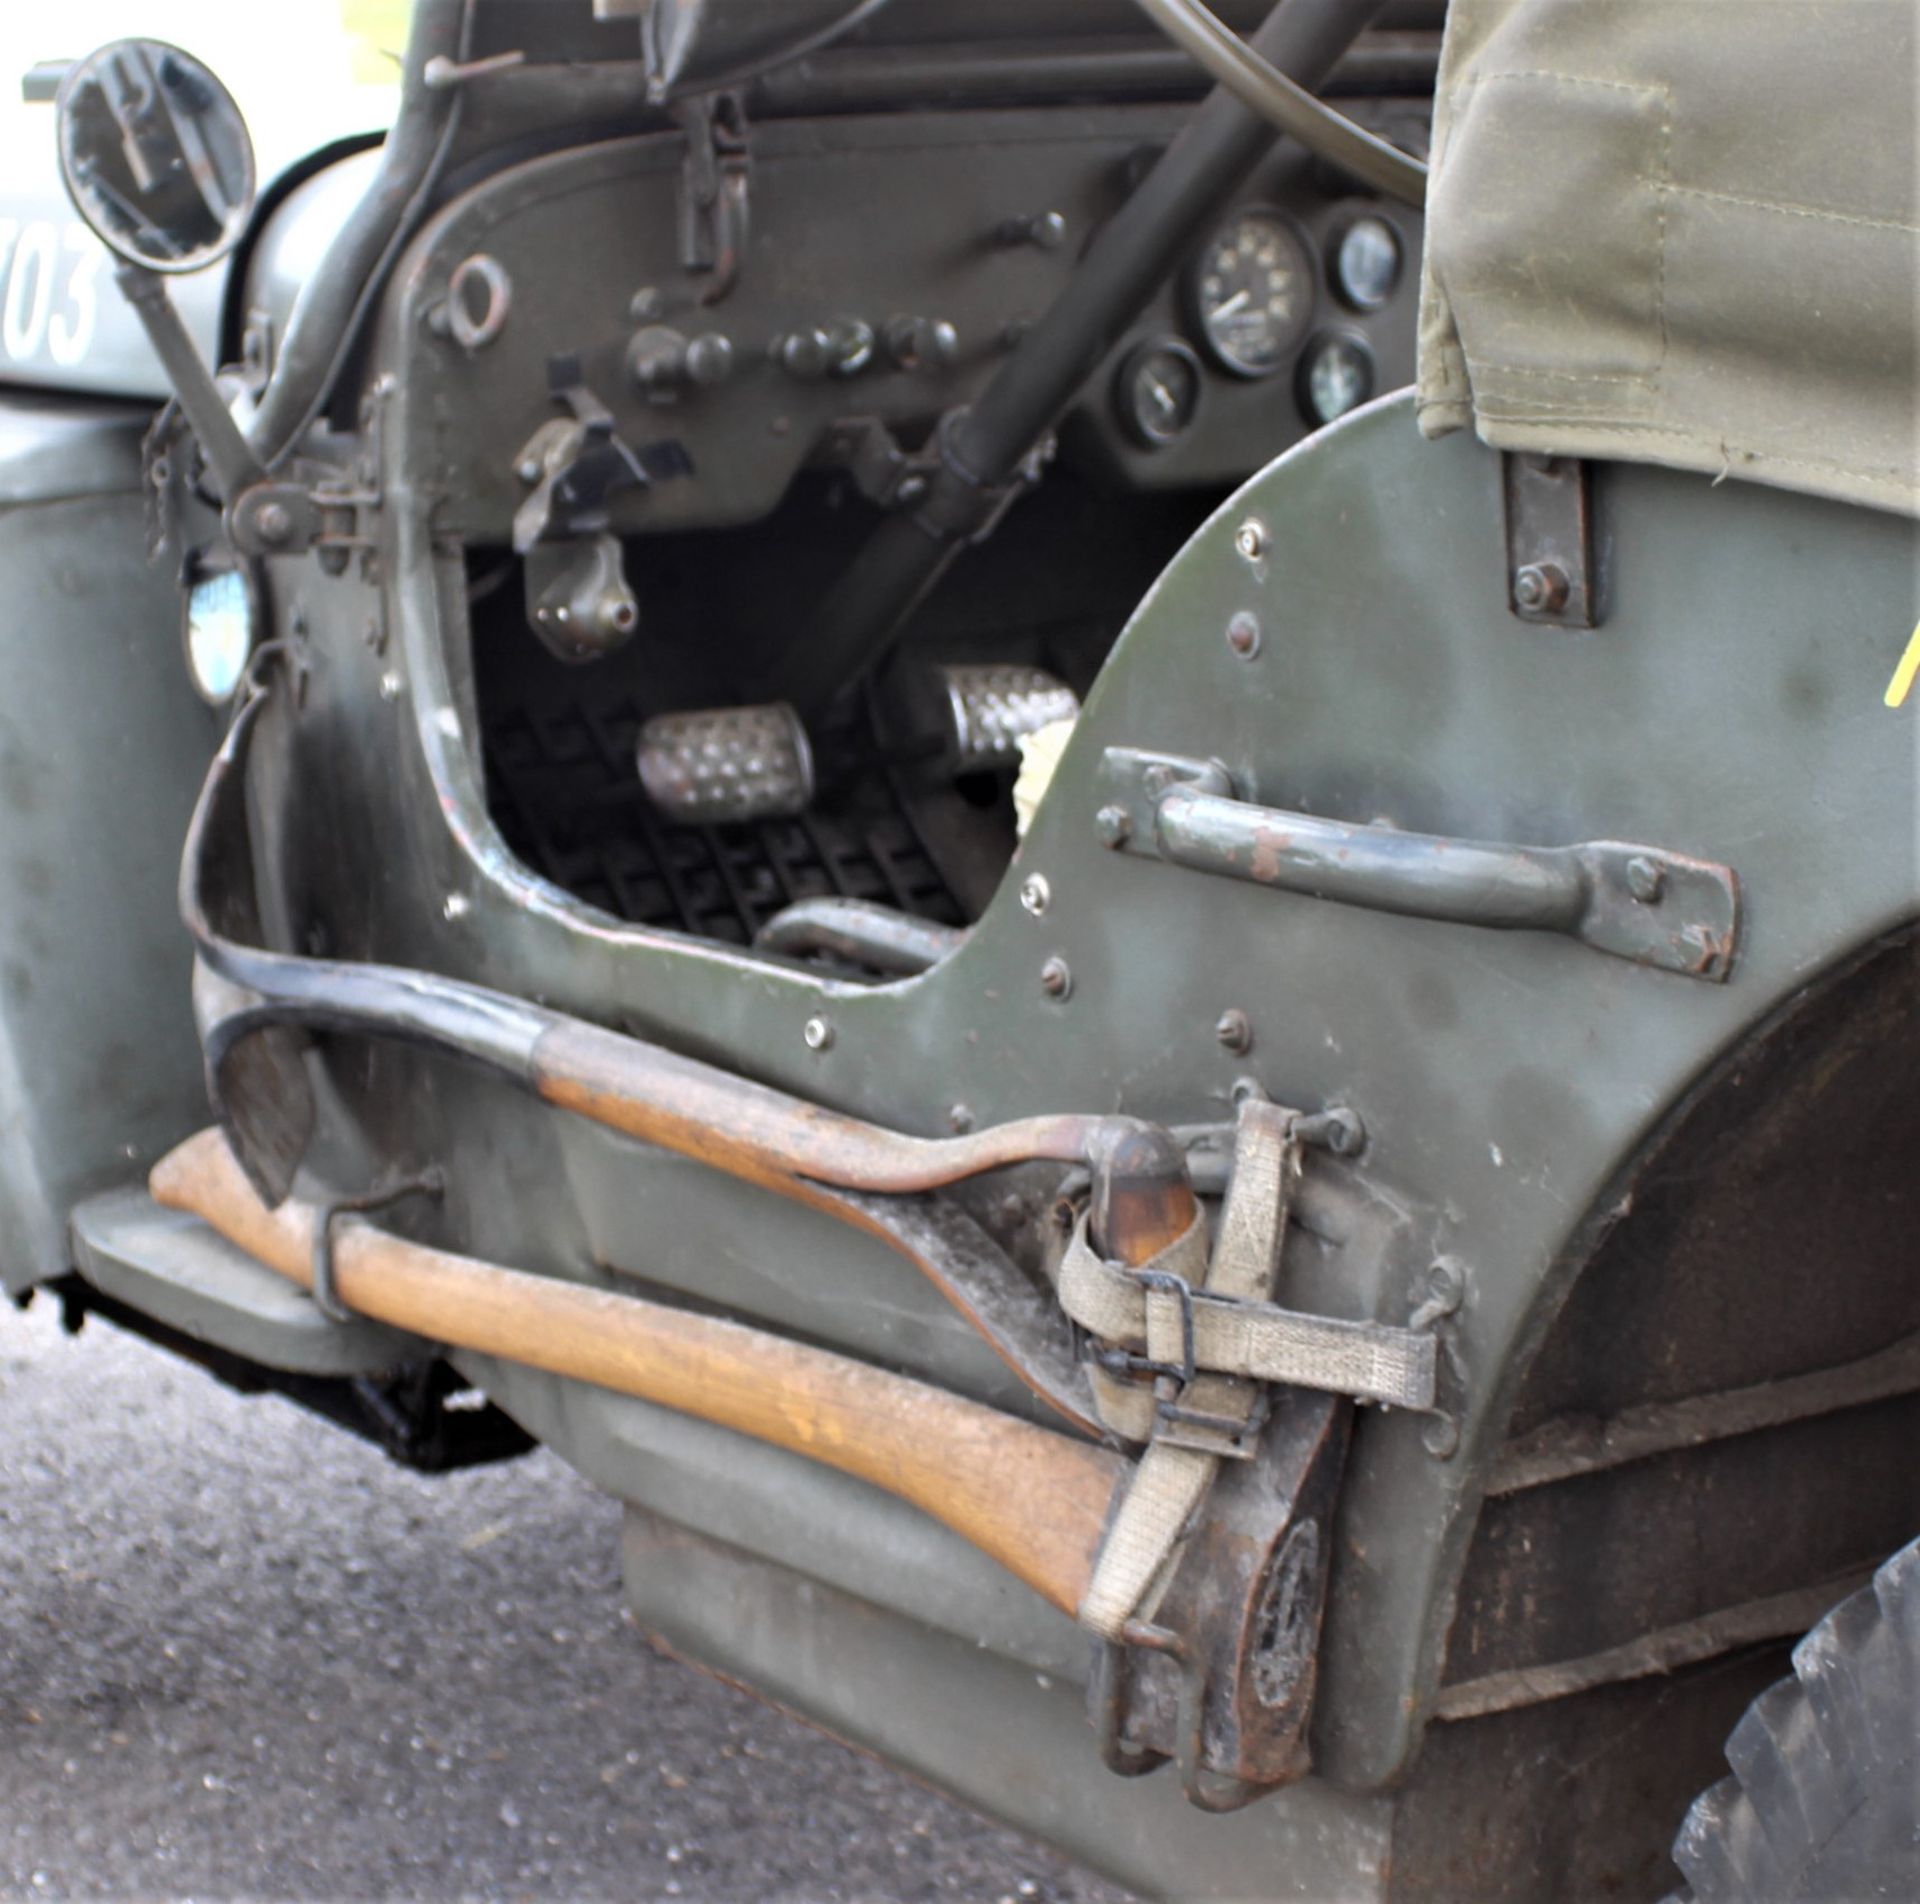 1942 FORD GPW JEEP Registration Number: XSK 114 Chassis Number: 76230 The Ford GPW (commonly known - Image 5 of 14